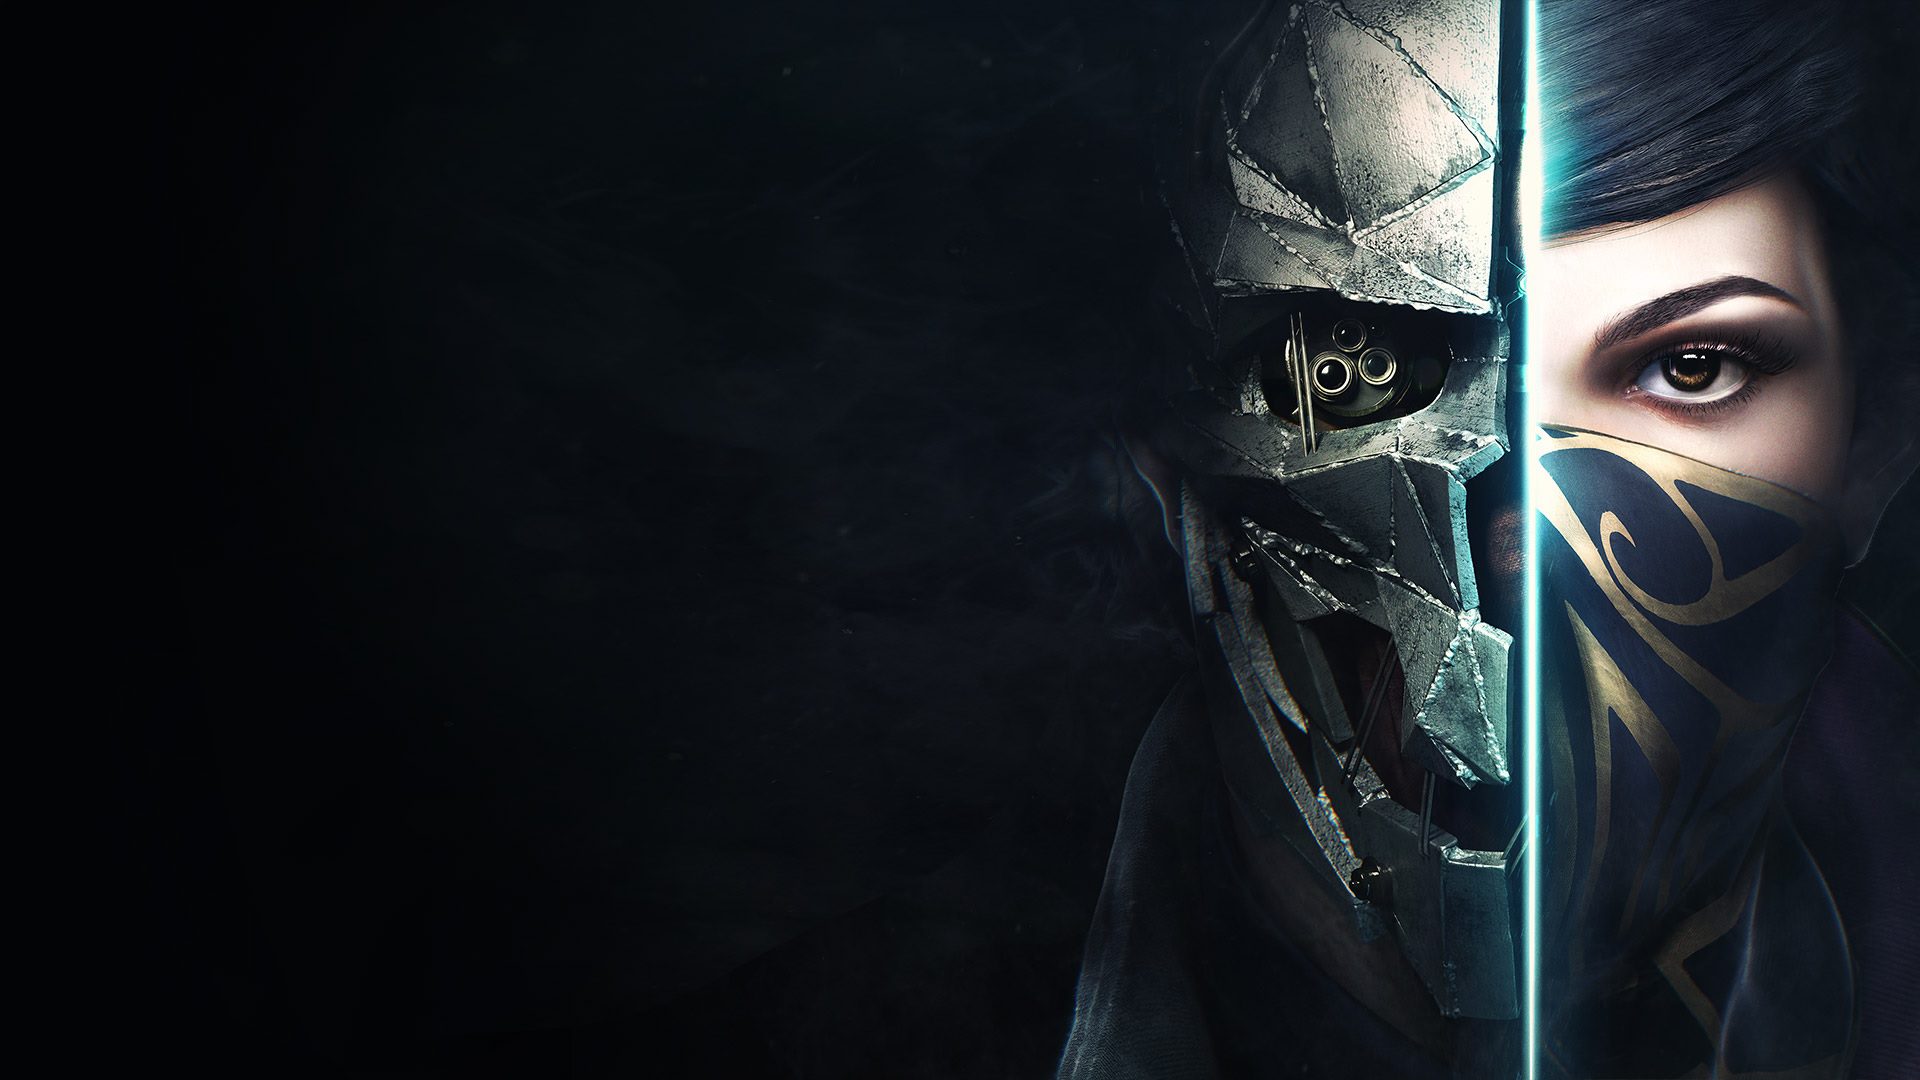 Dishonored Dev Arkane Studios is working on an unannounced game